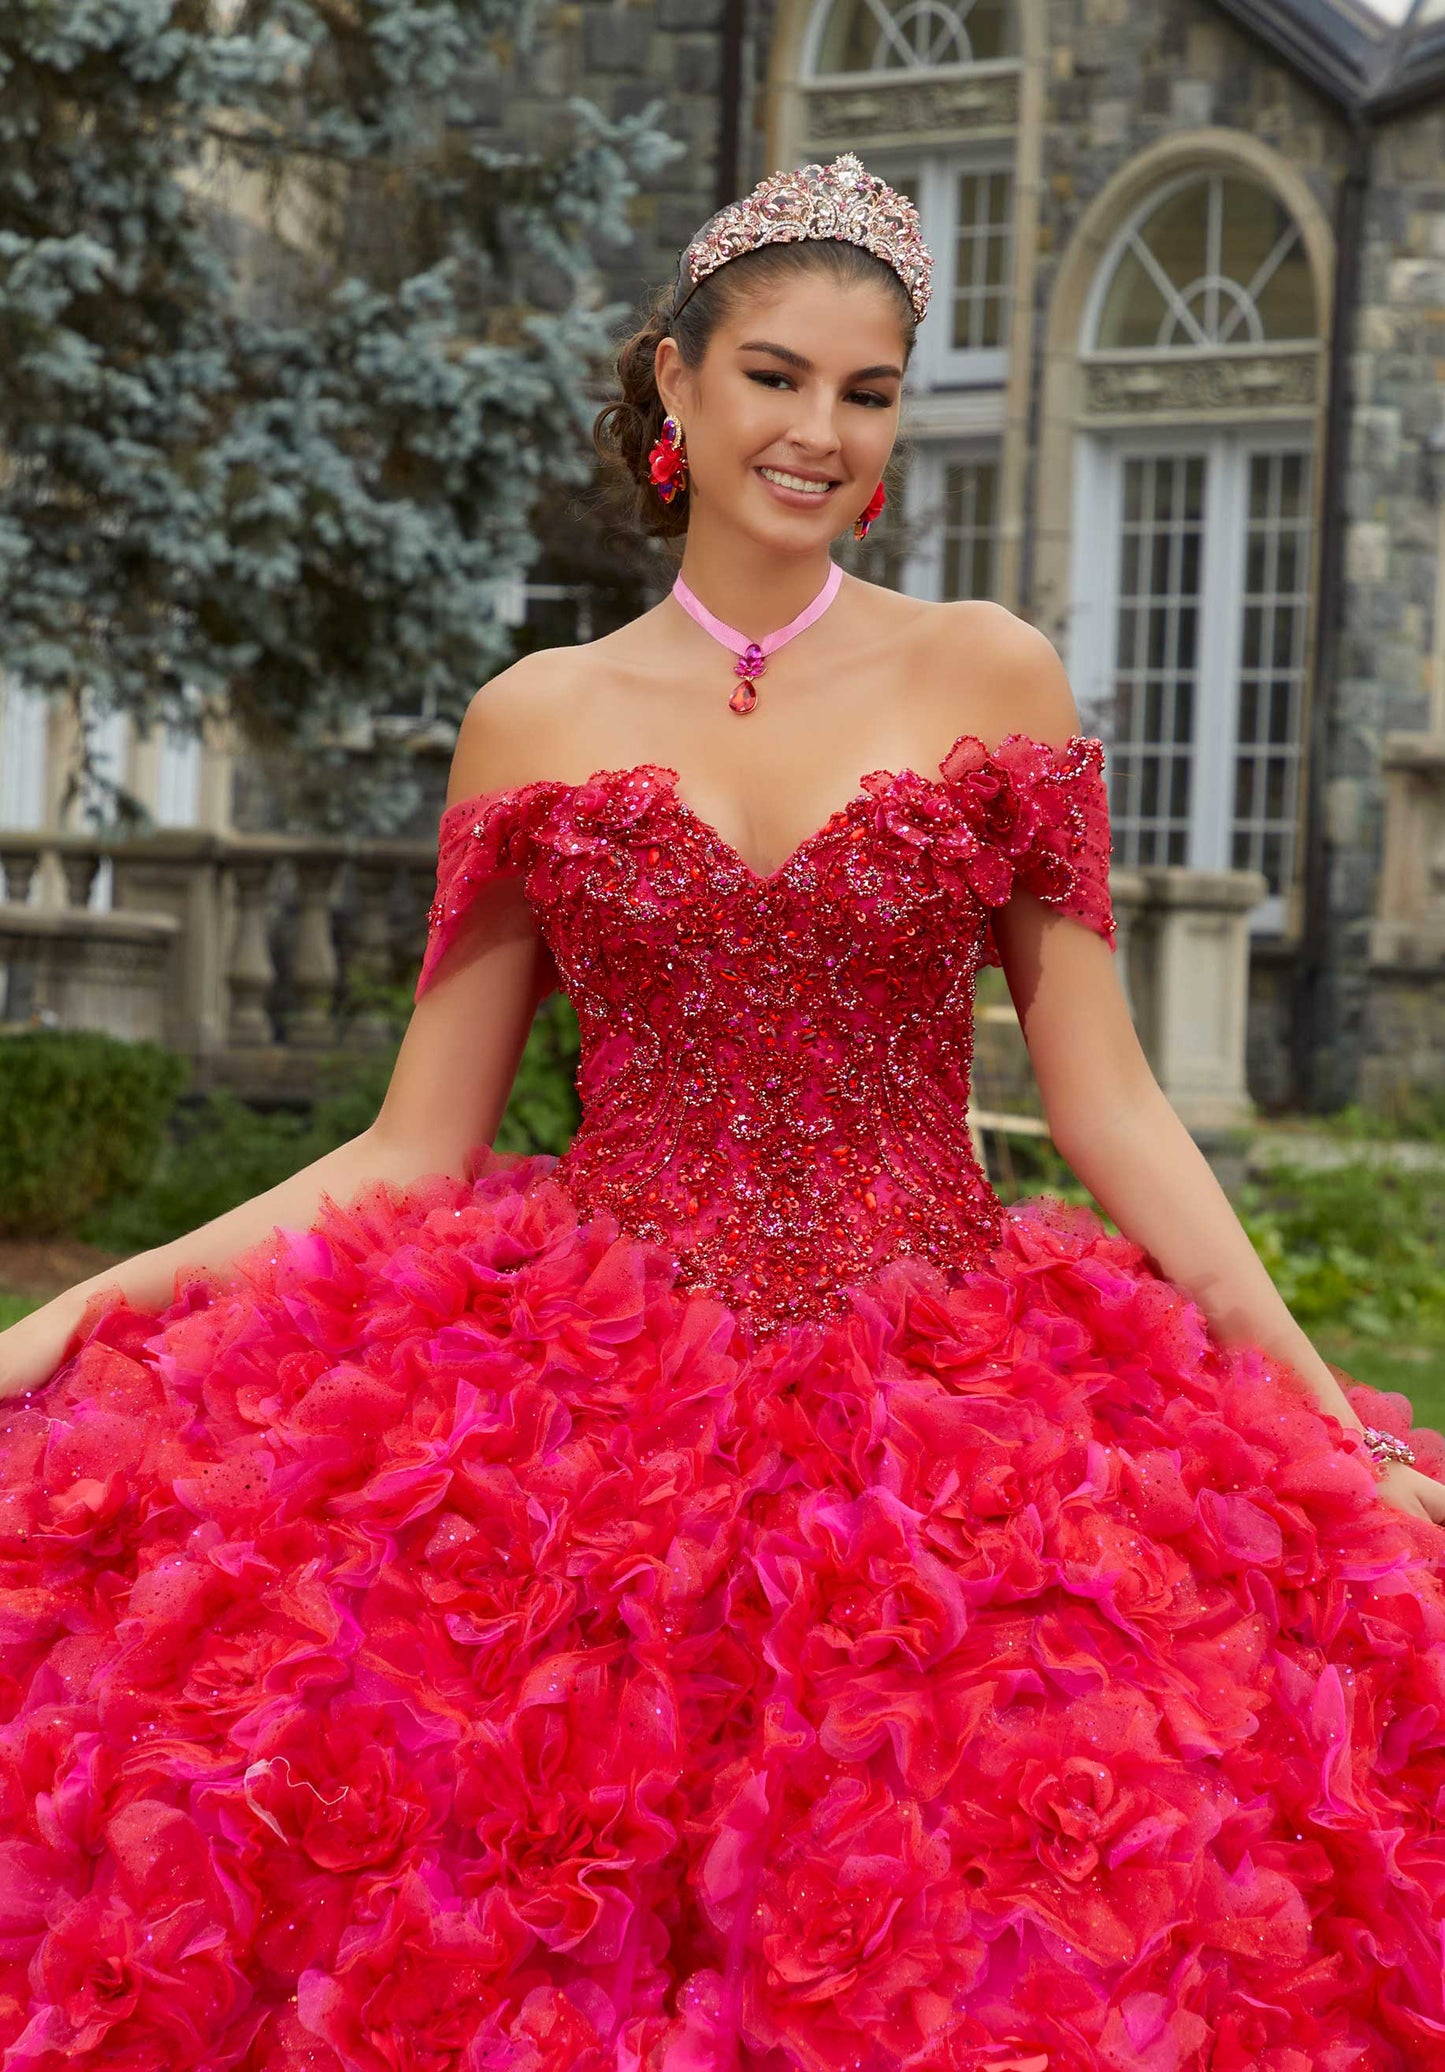 11320 | Three-Dimensional Floral Lace Quinceañera Dress with Floral Skirt